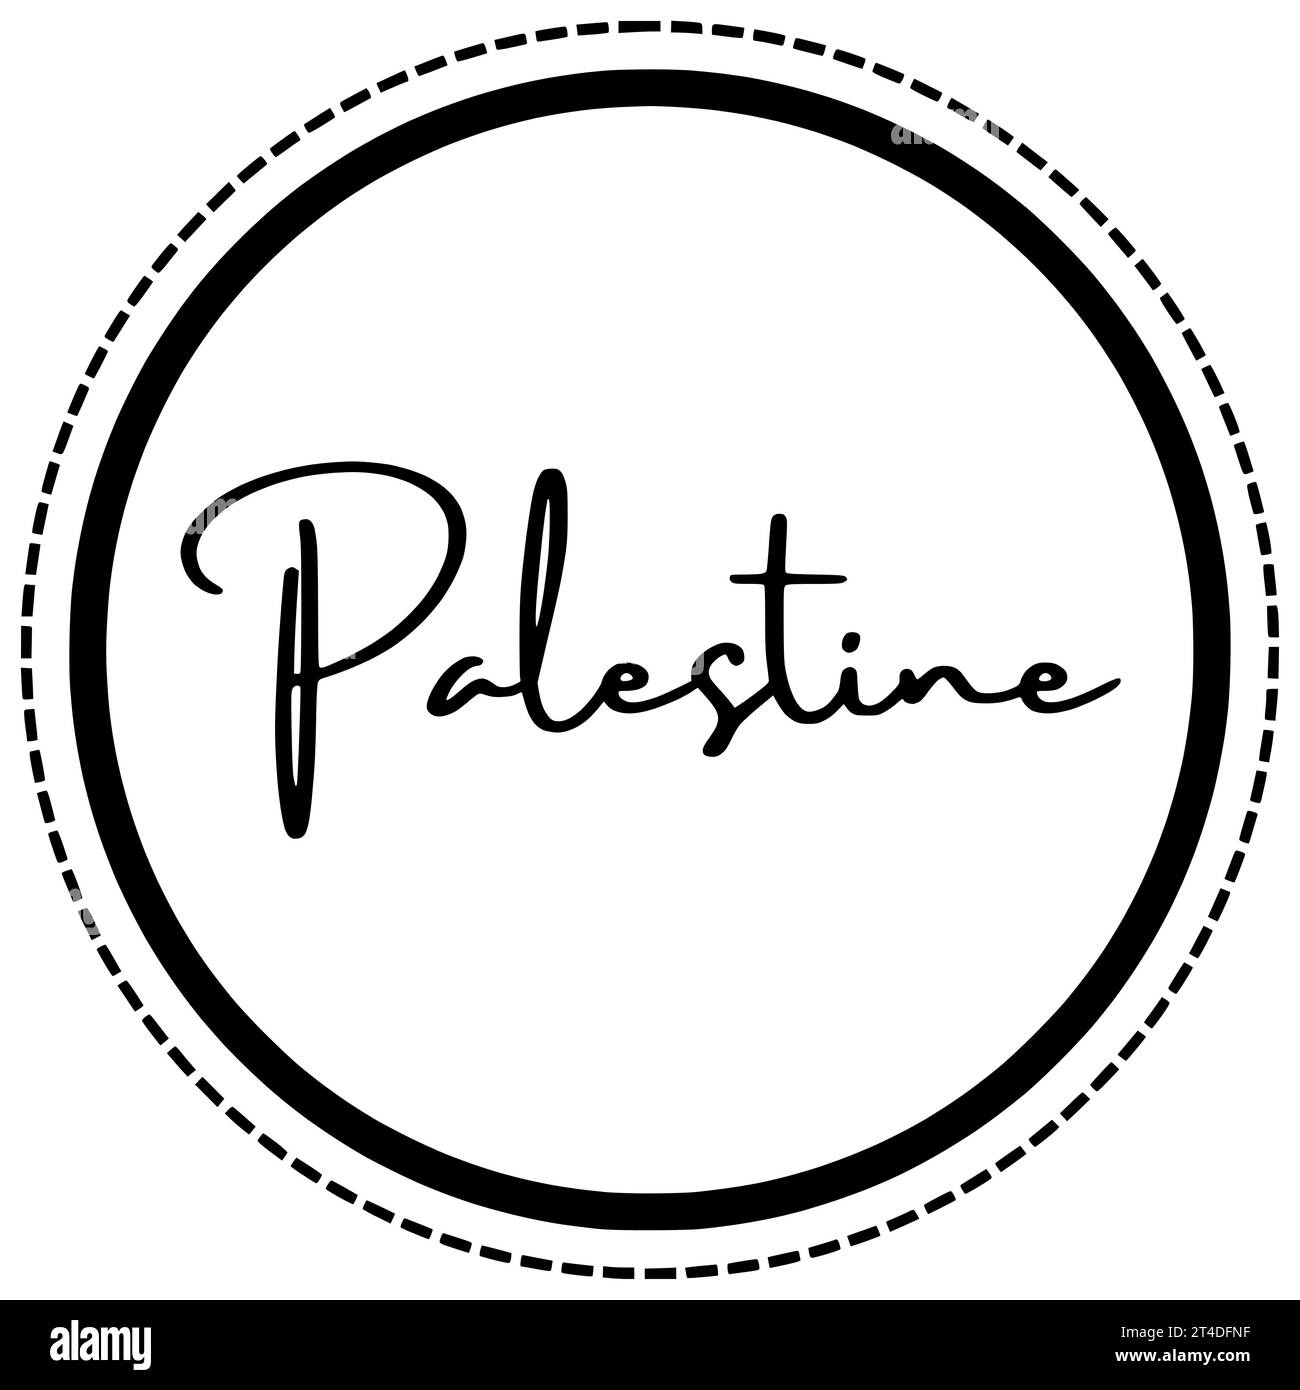 respect black palestine silhouette patriotism illustration flag icon freedom logo text typography war israel independence politics national conflict Stock Photo